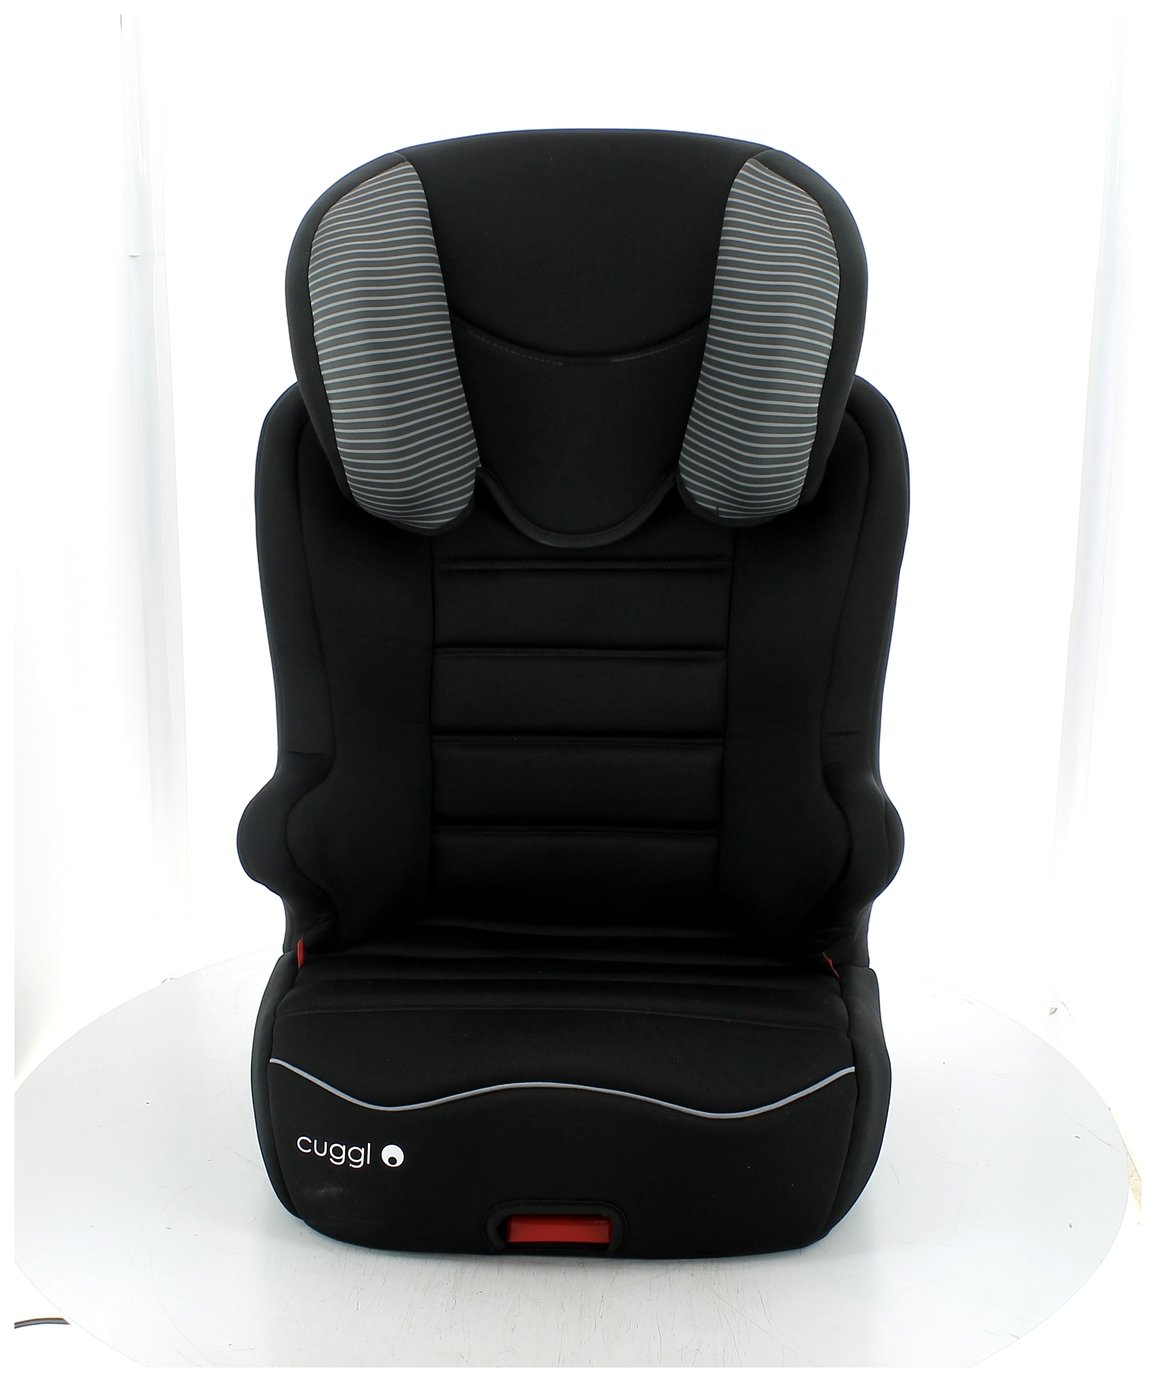 Cuggl Sandpiper Group 2/3 ISOFIX Car Seat Review